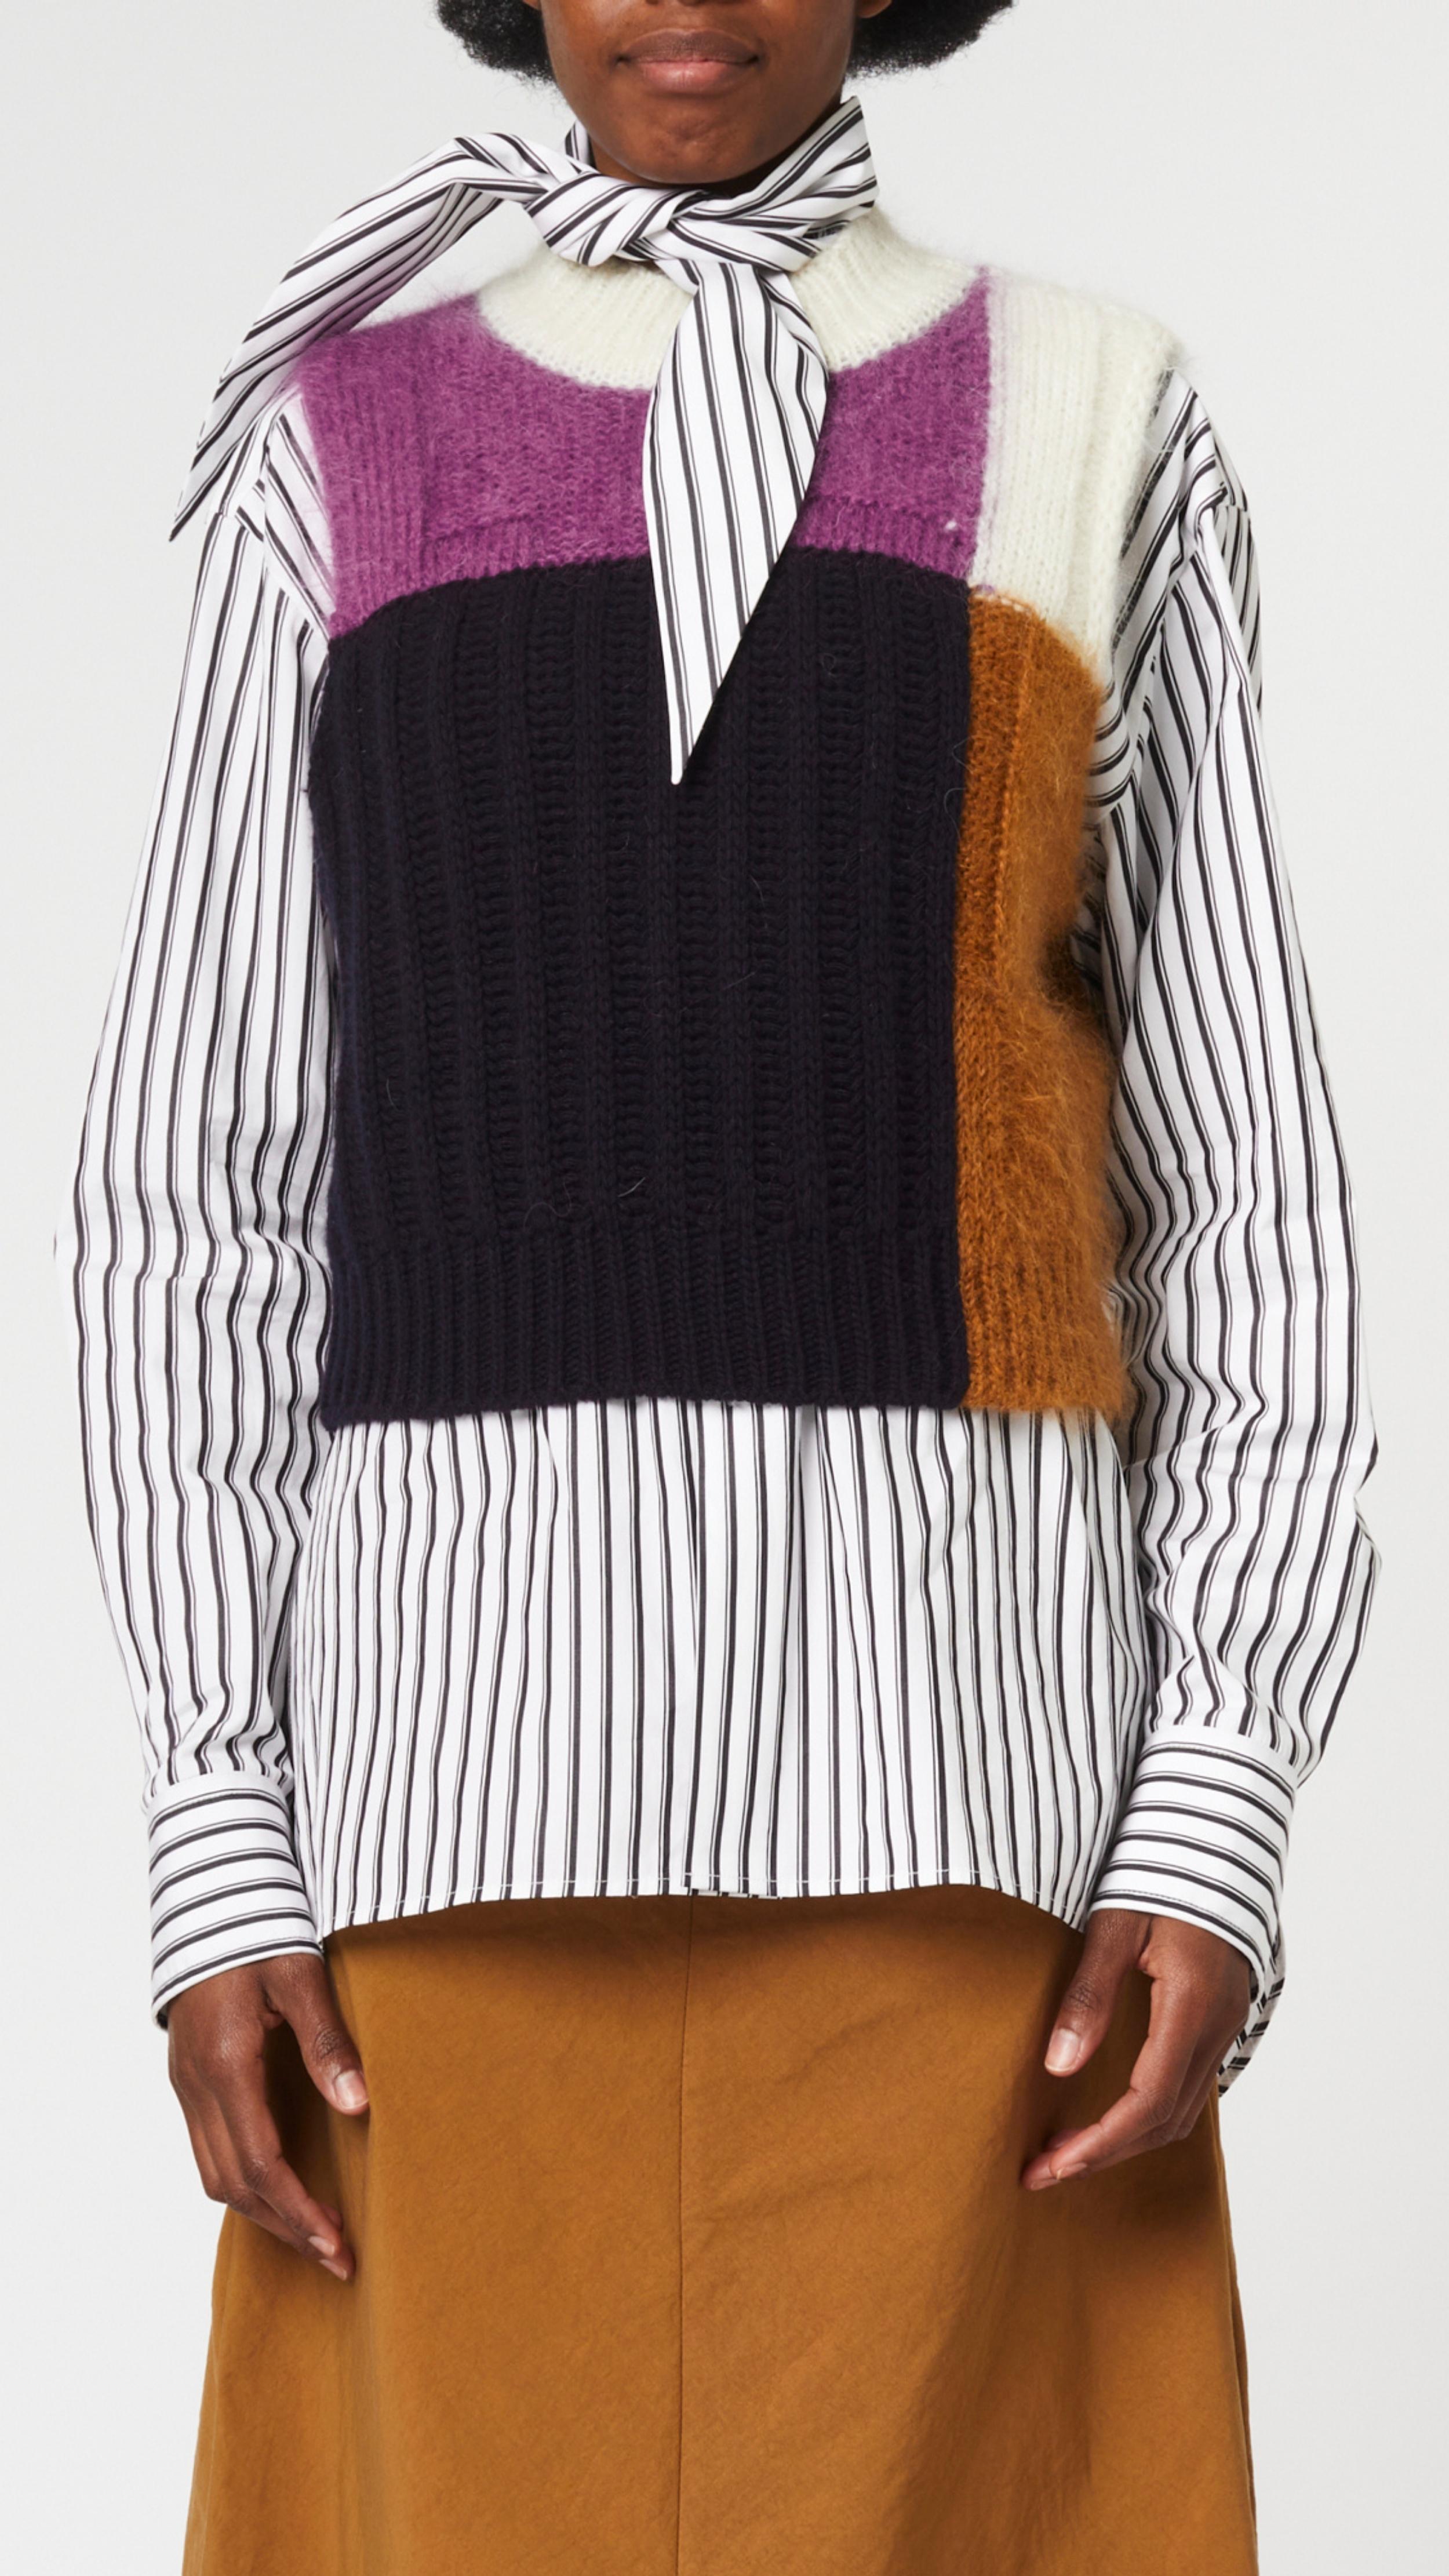 Plan C Color Block Vest. Sleeveless vest style in squares of black, purple, camel and white alpaca and wool blend knit. Shown on model facing front.